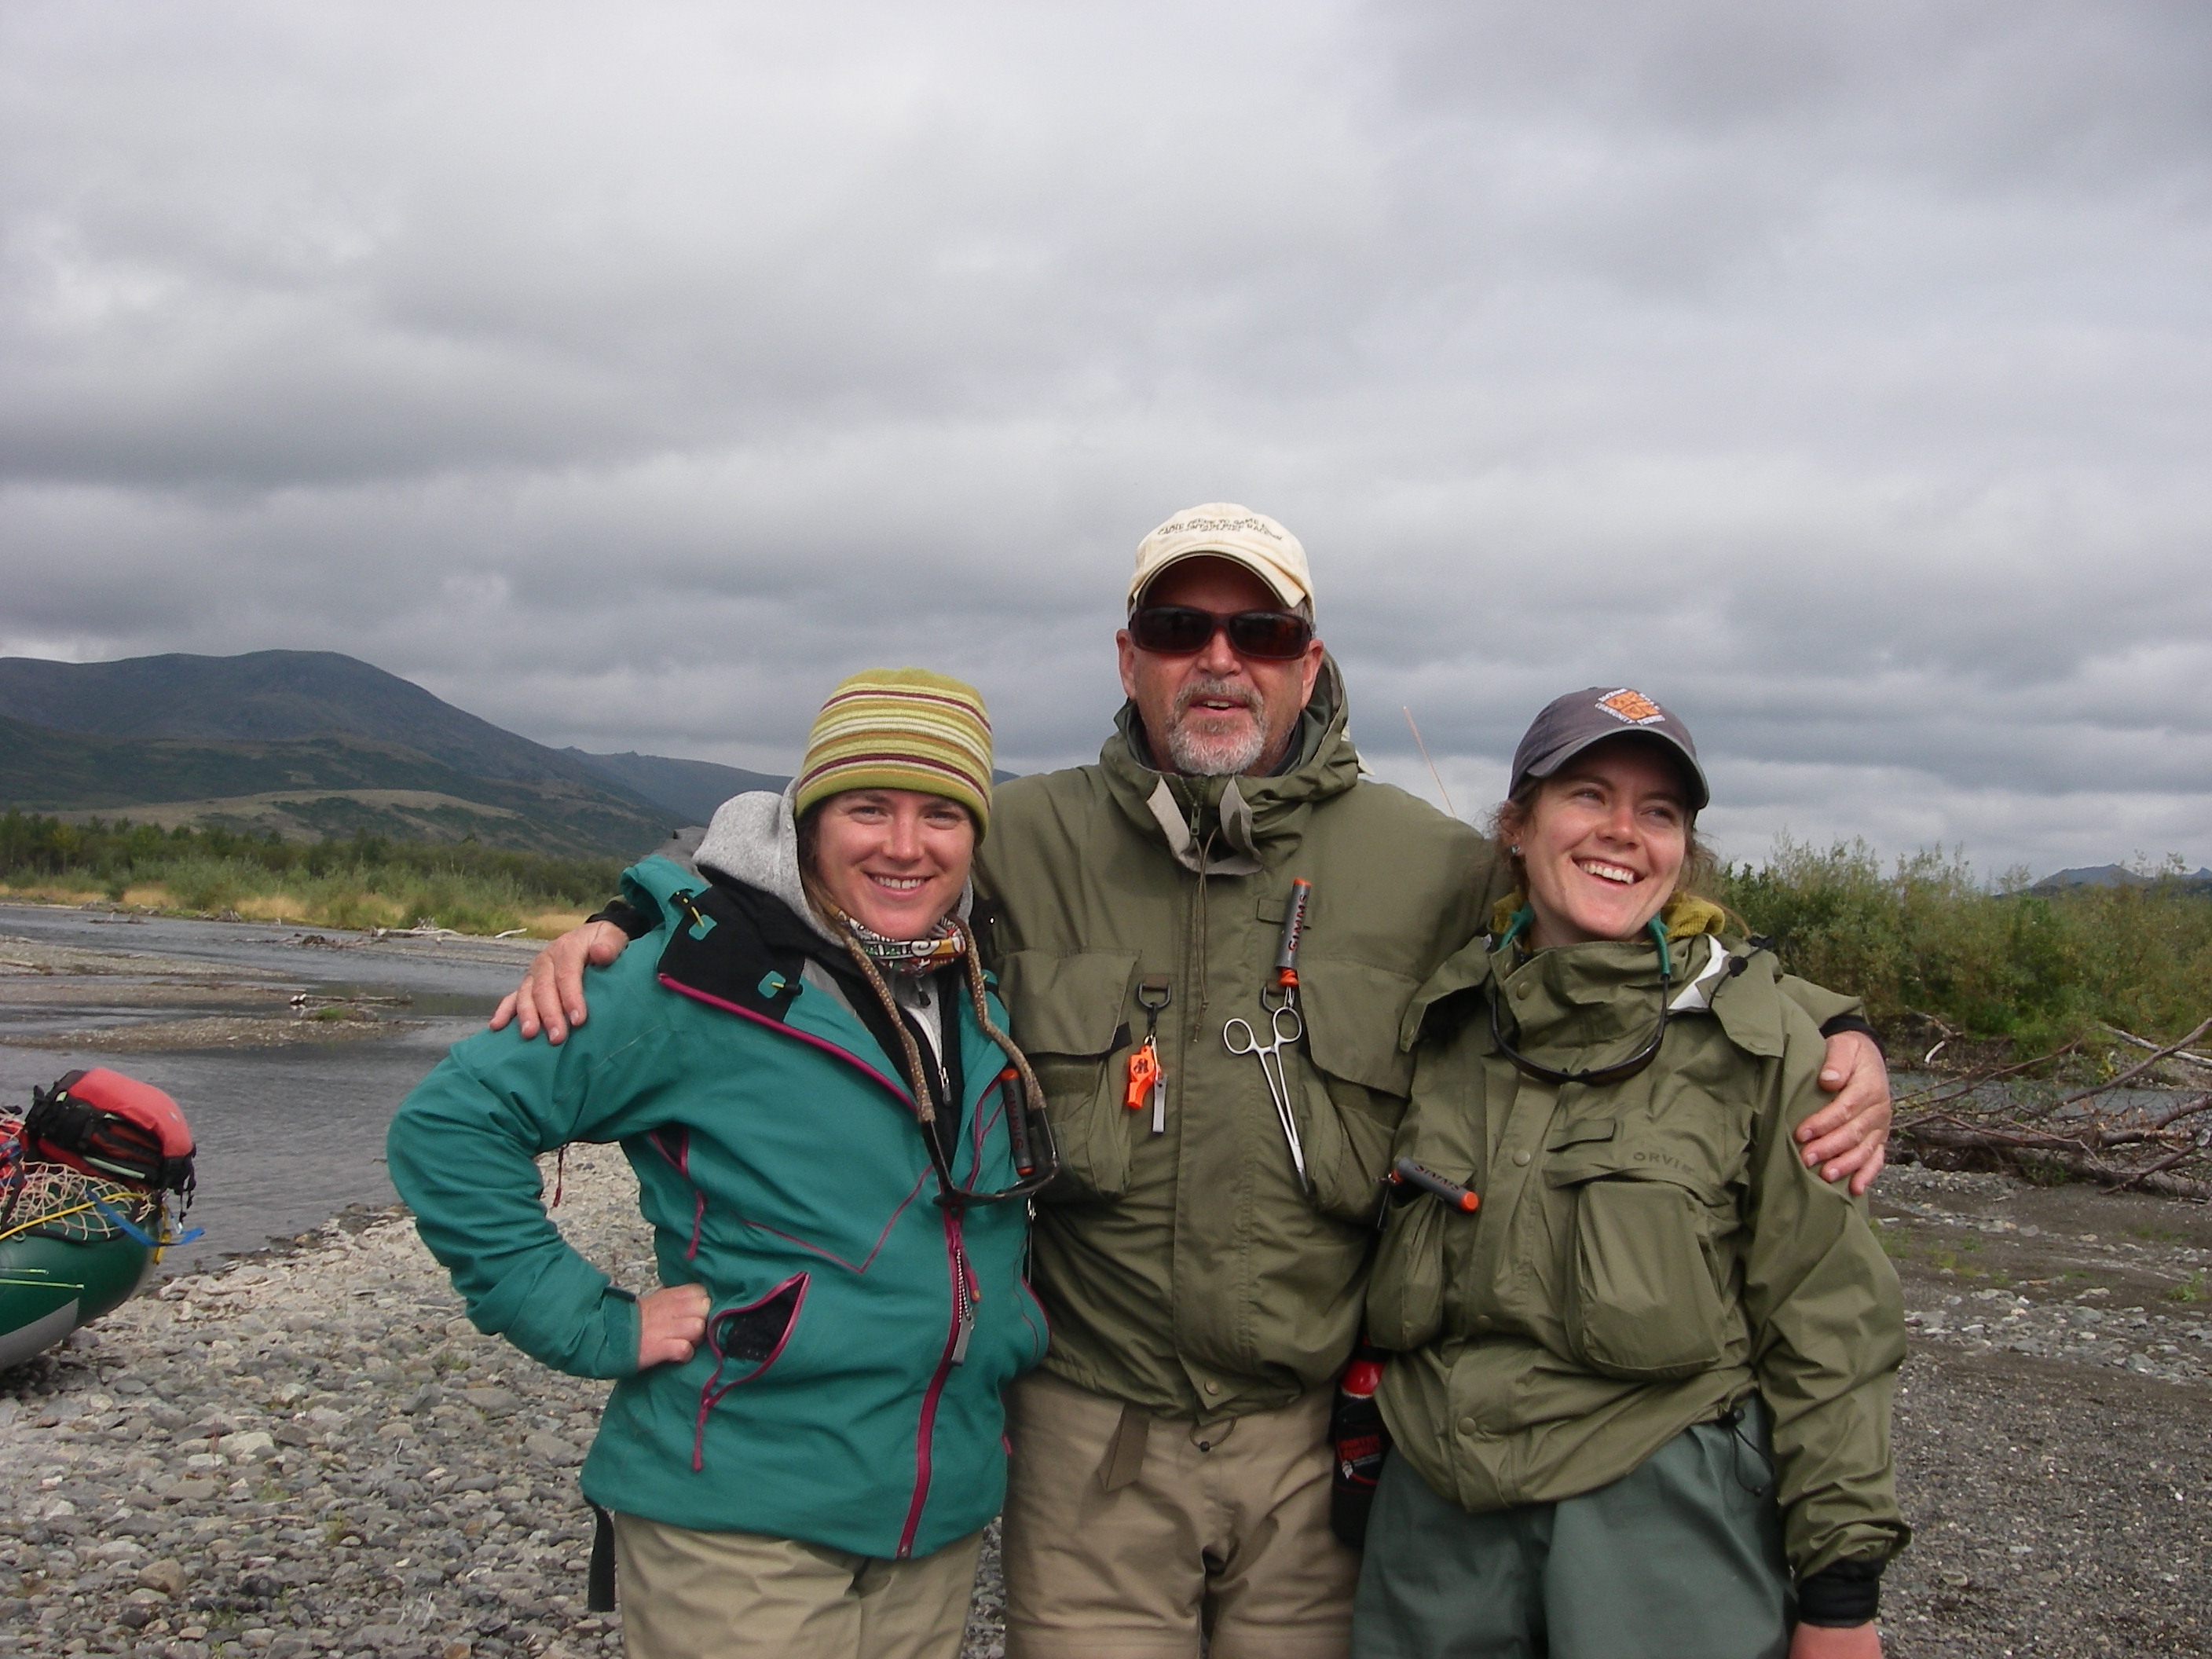 Wading Jackets are Critical Gear - Wild River Fish